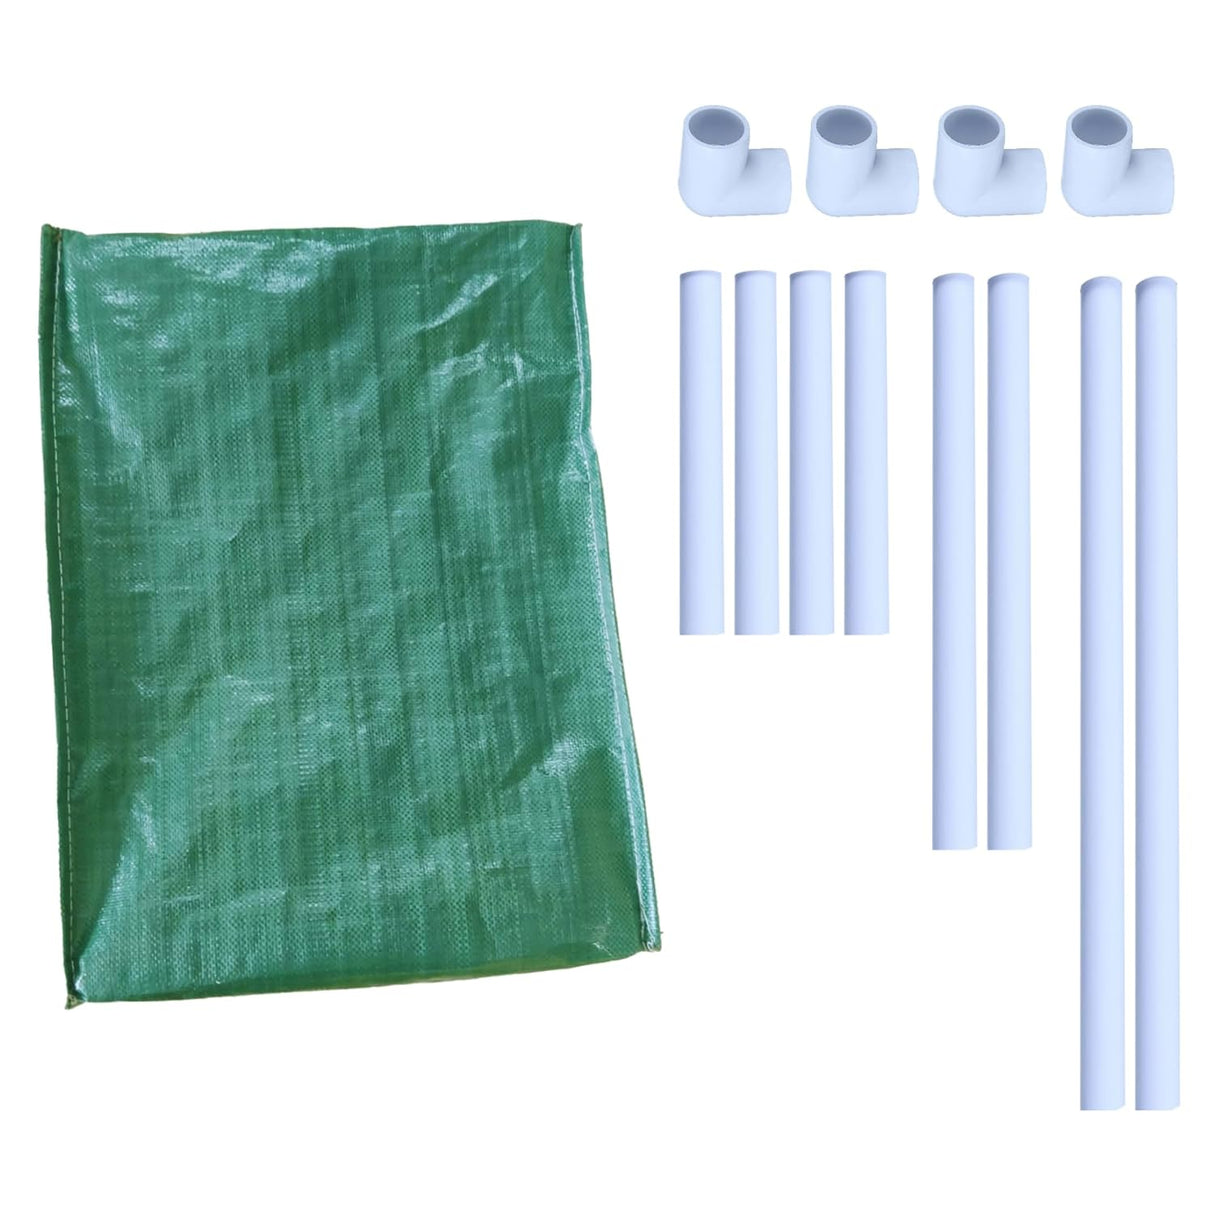 Green Color Rectangular Plants Grow Bags 6 x 4 x 1  with PVC pipe setup - Singhal Mart